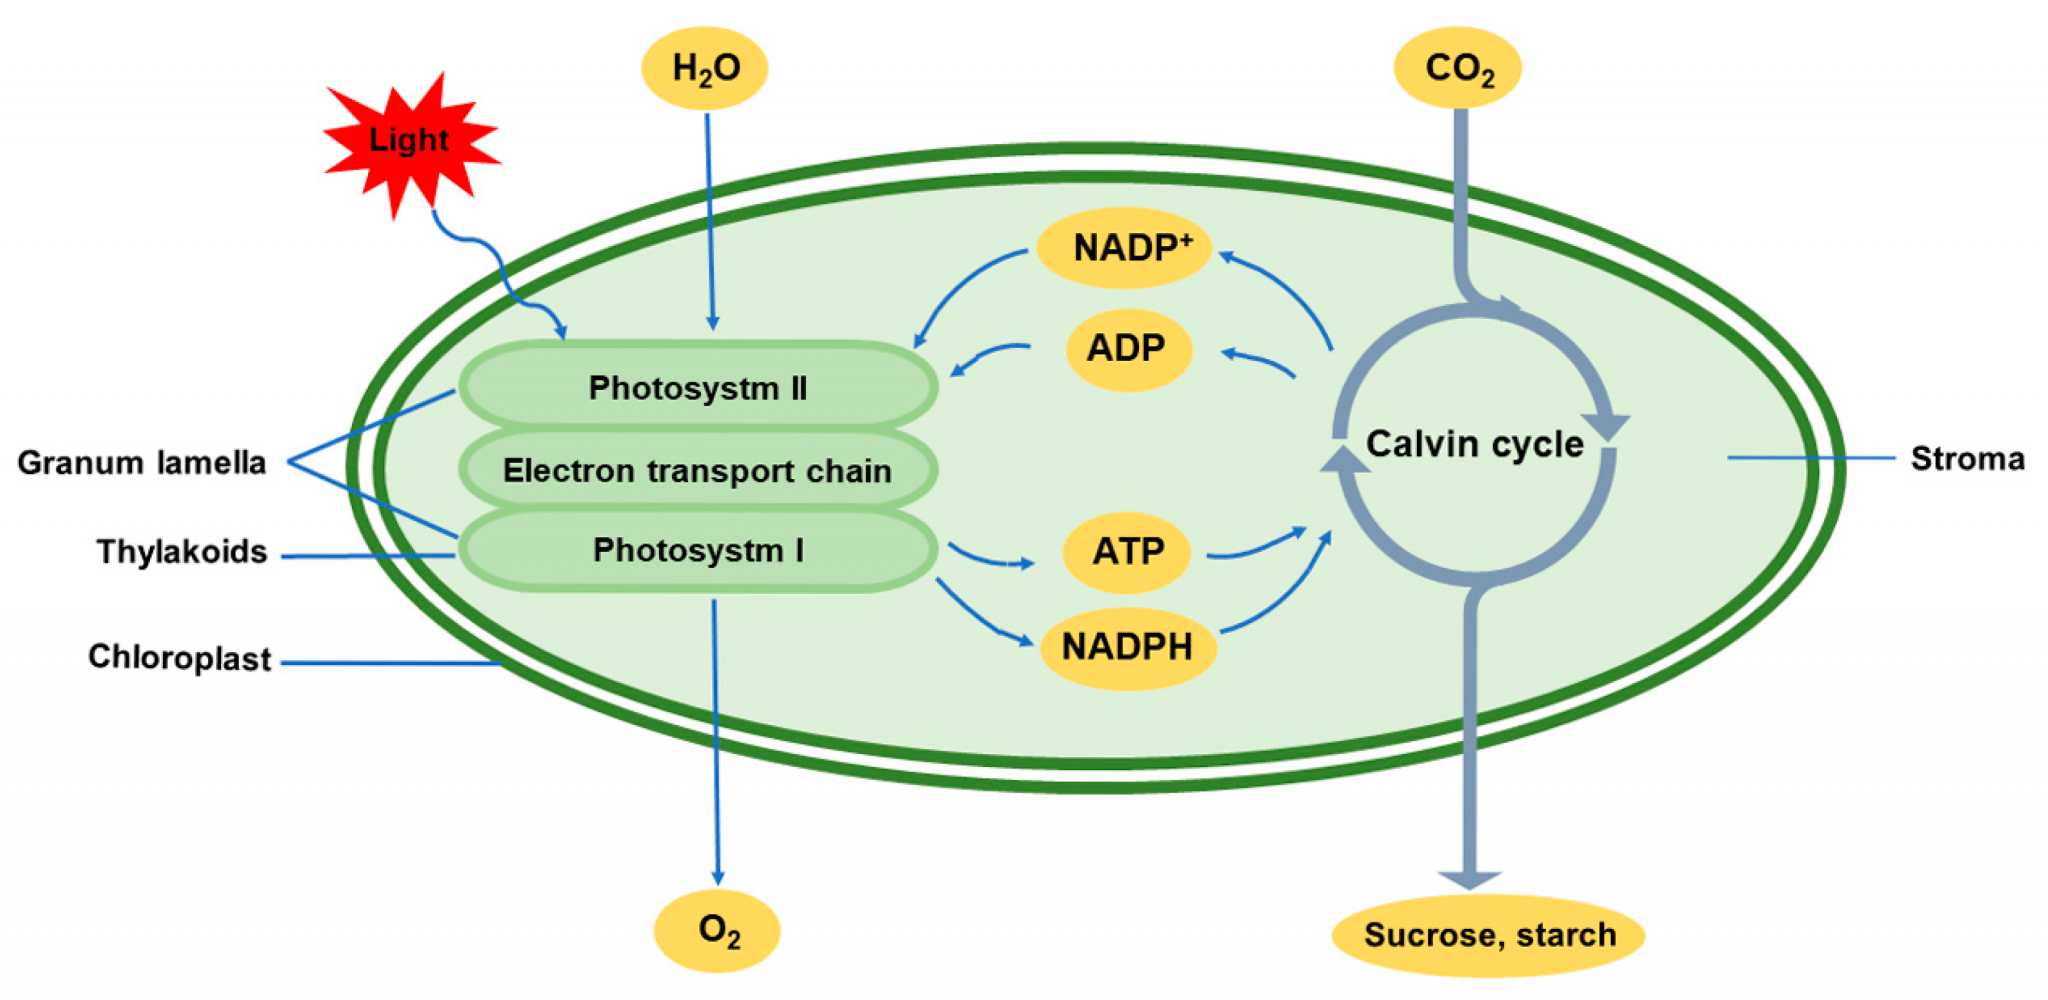 Recent progress in photosynthesis research